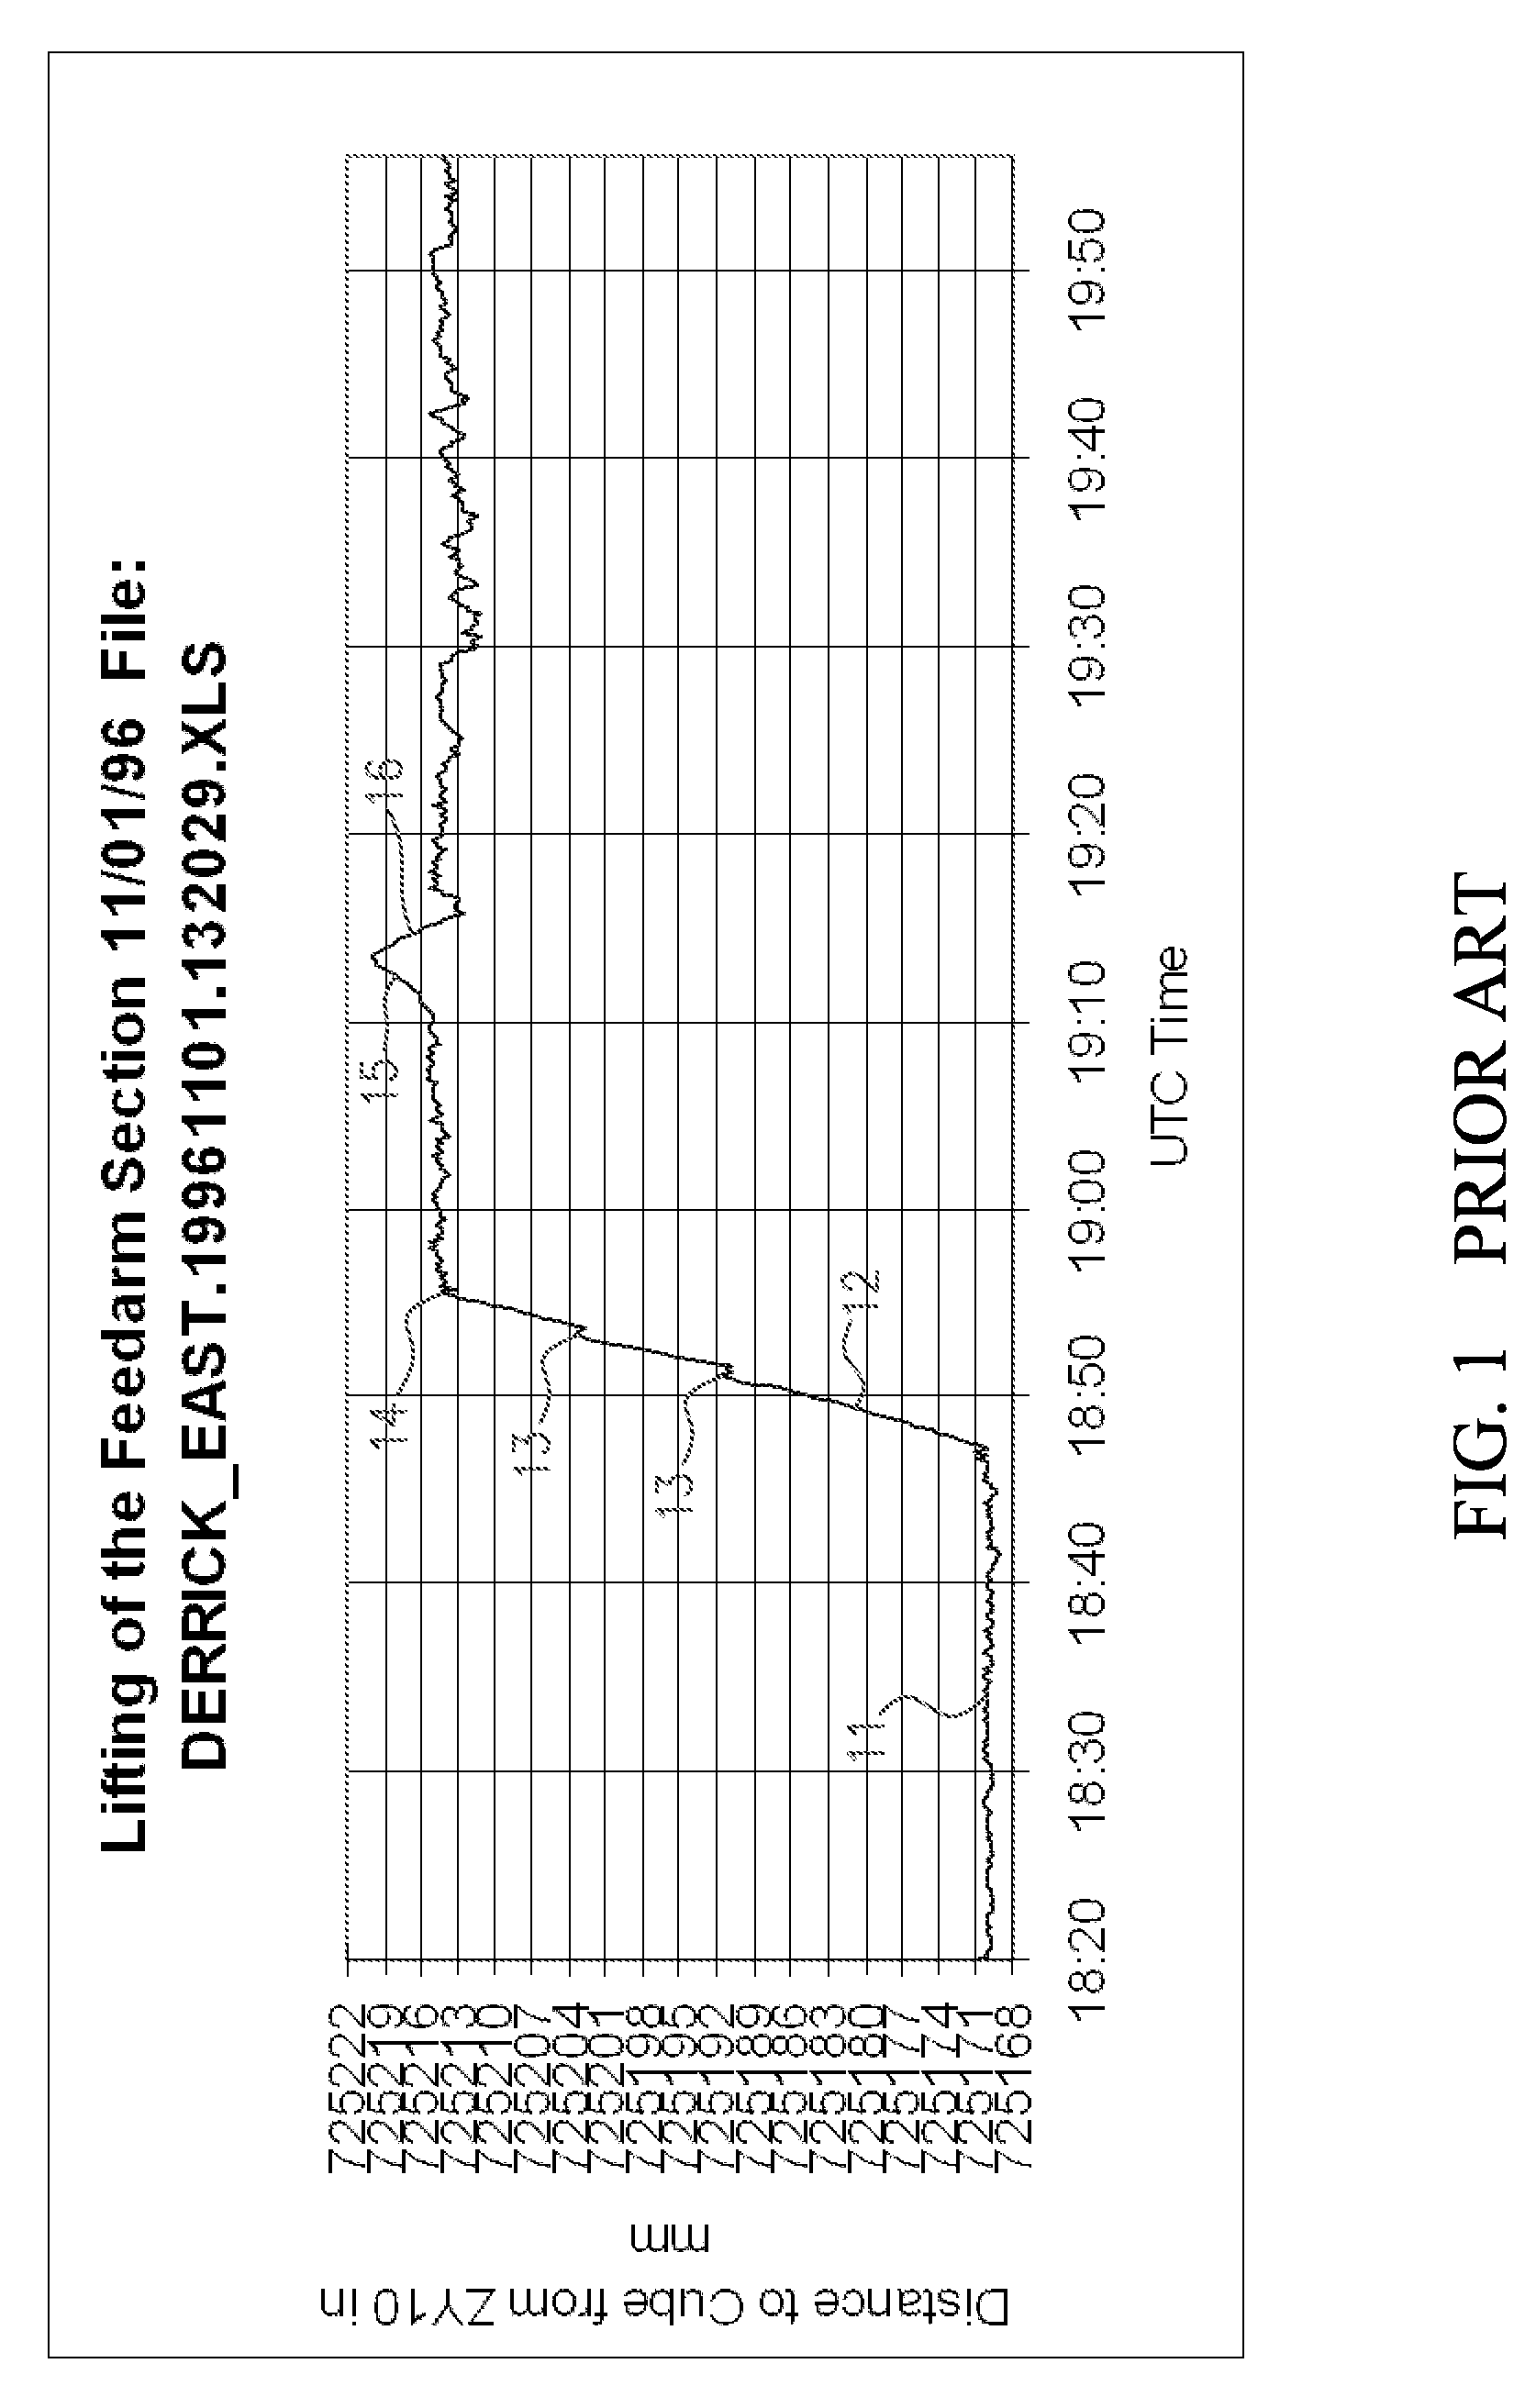 Method for Measuring the Structural Health of a Civil Structure